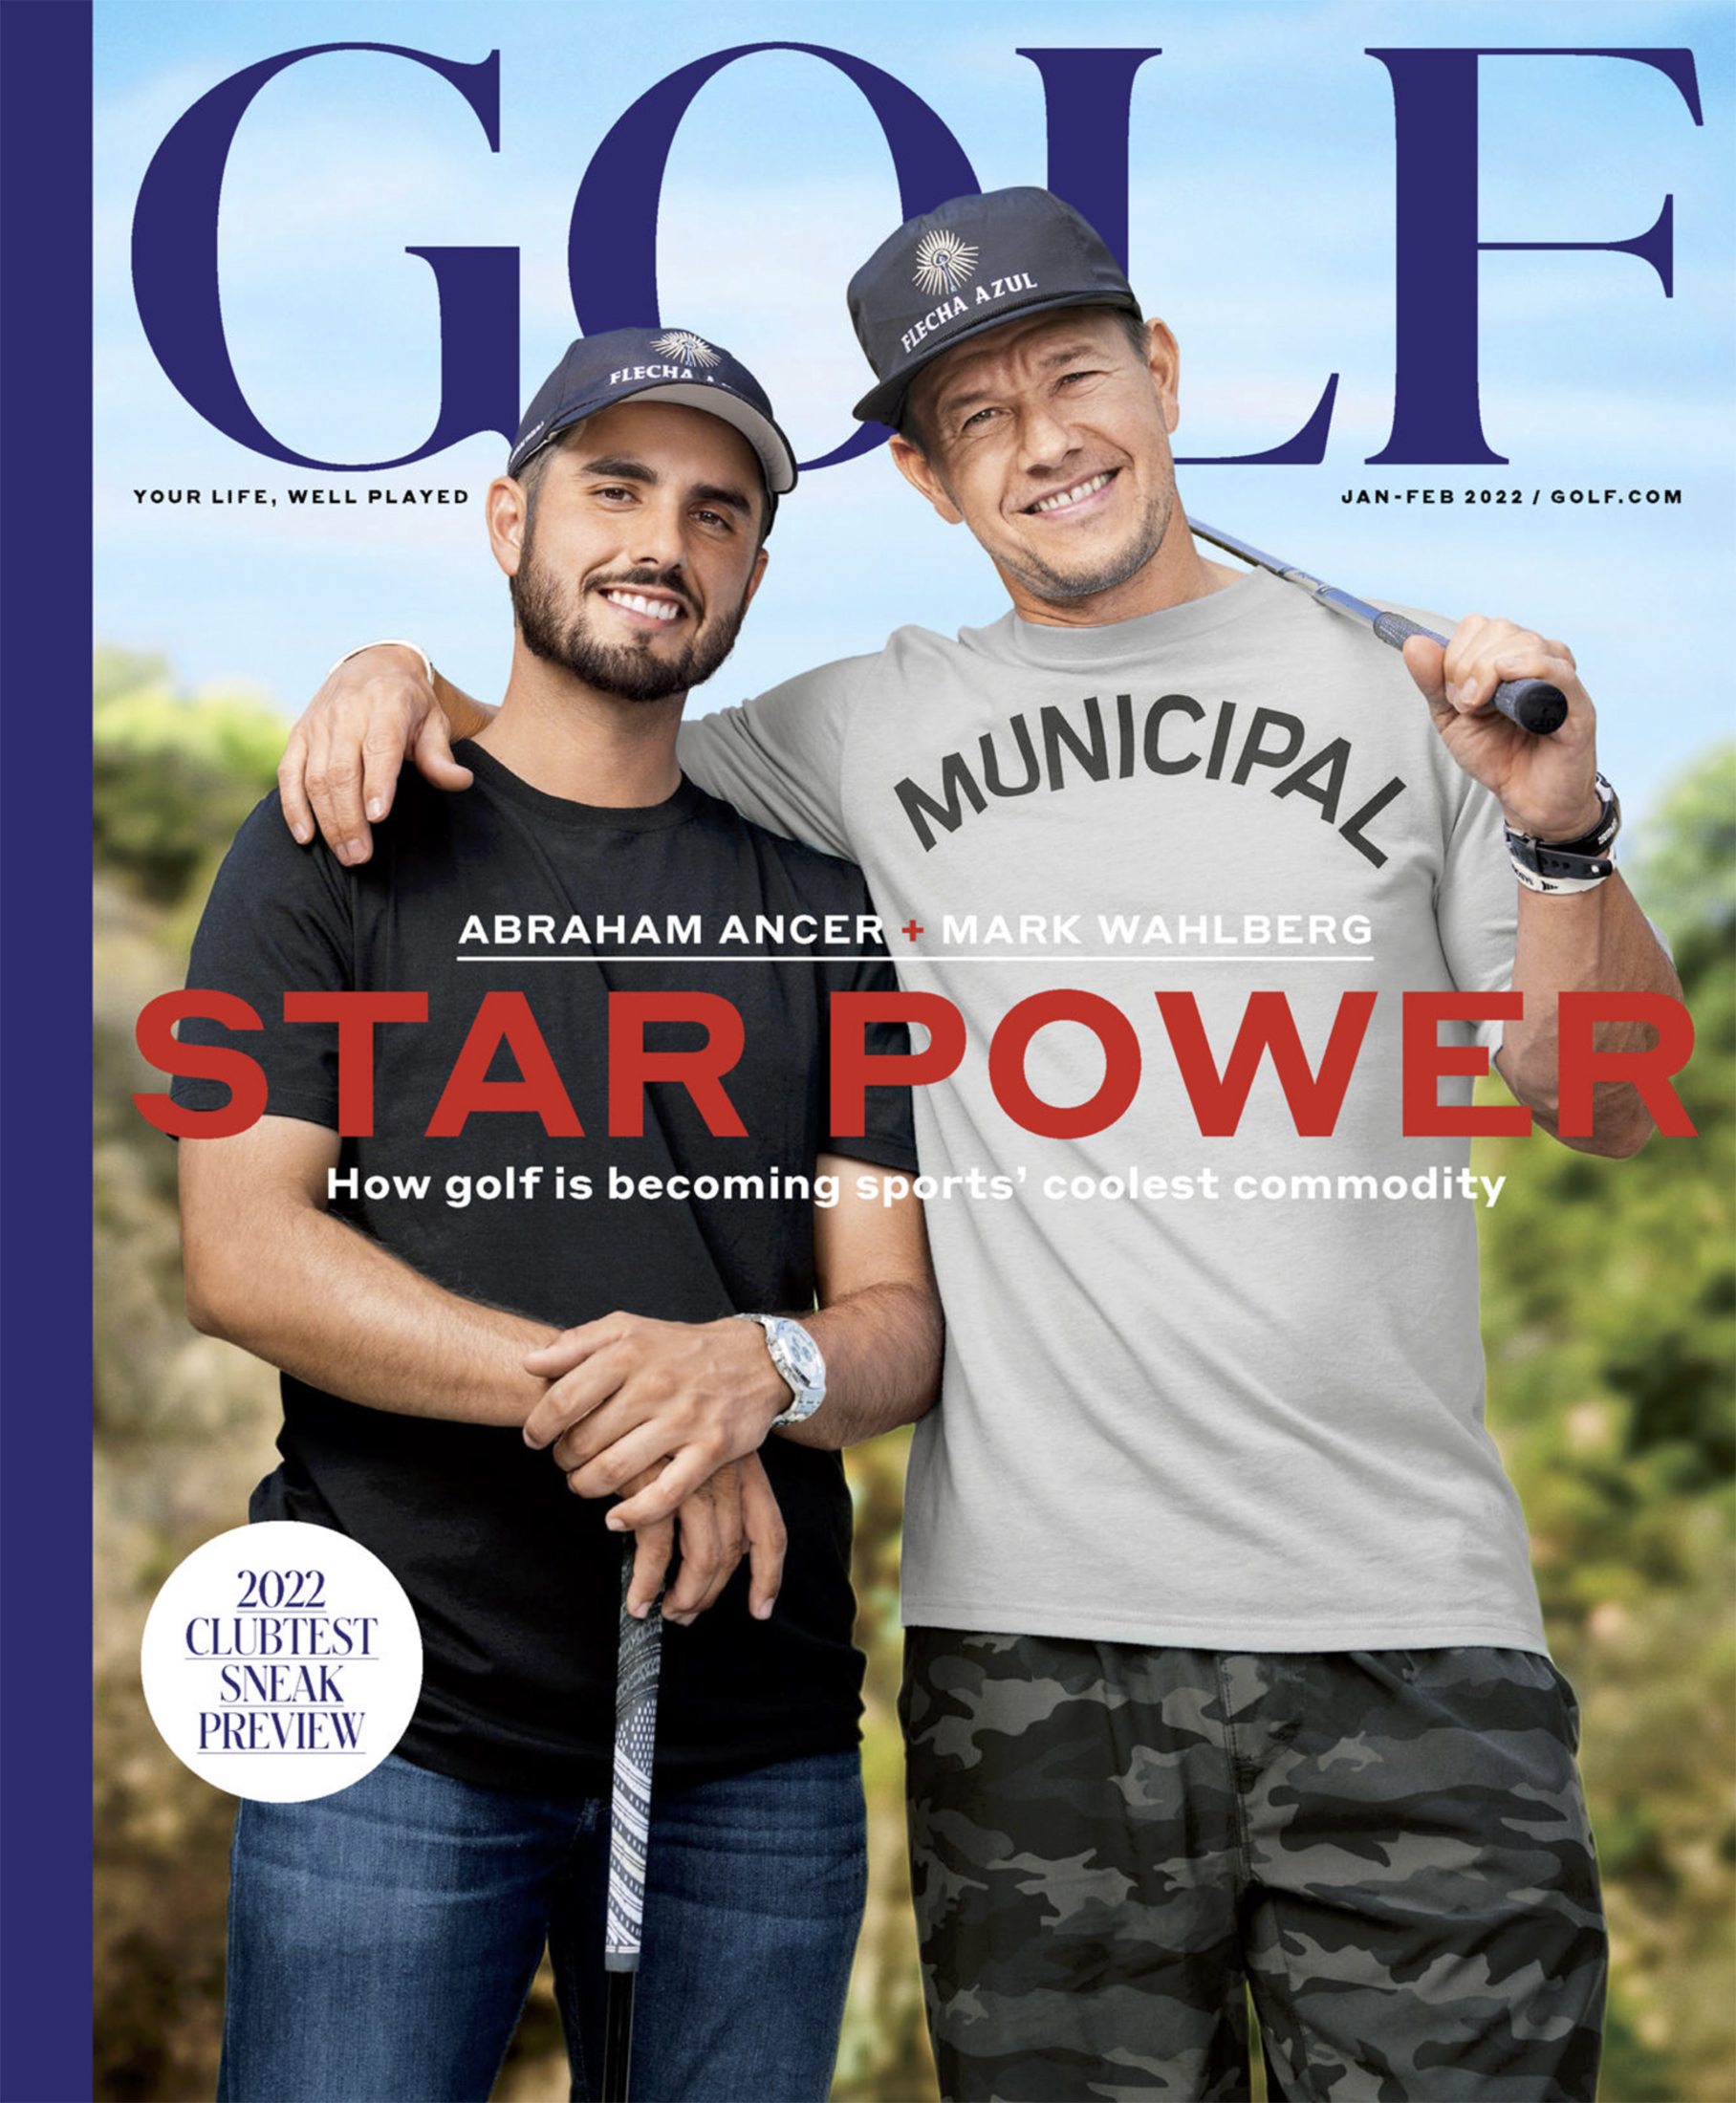 Mark Wahlberg and Abraham Ancer for Golf Magazine - Stephen Denton Photography, Los Angeles, California based Architectural, Hospitality, & Aerial Photographer 